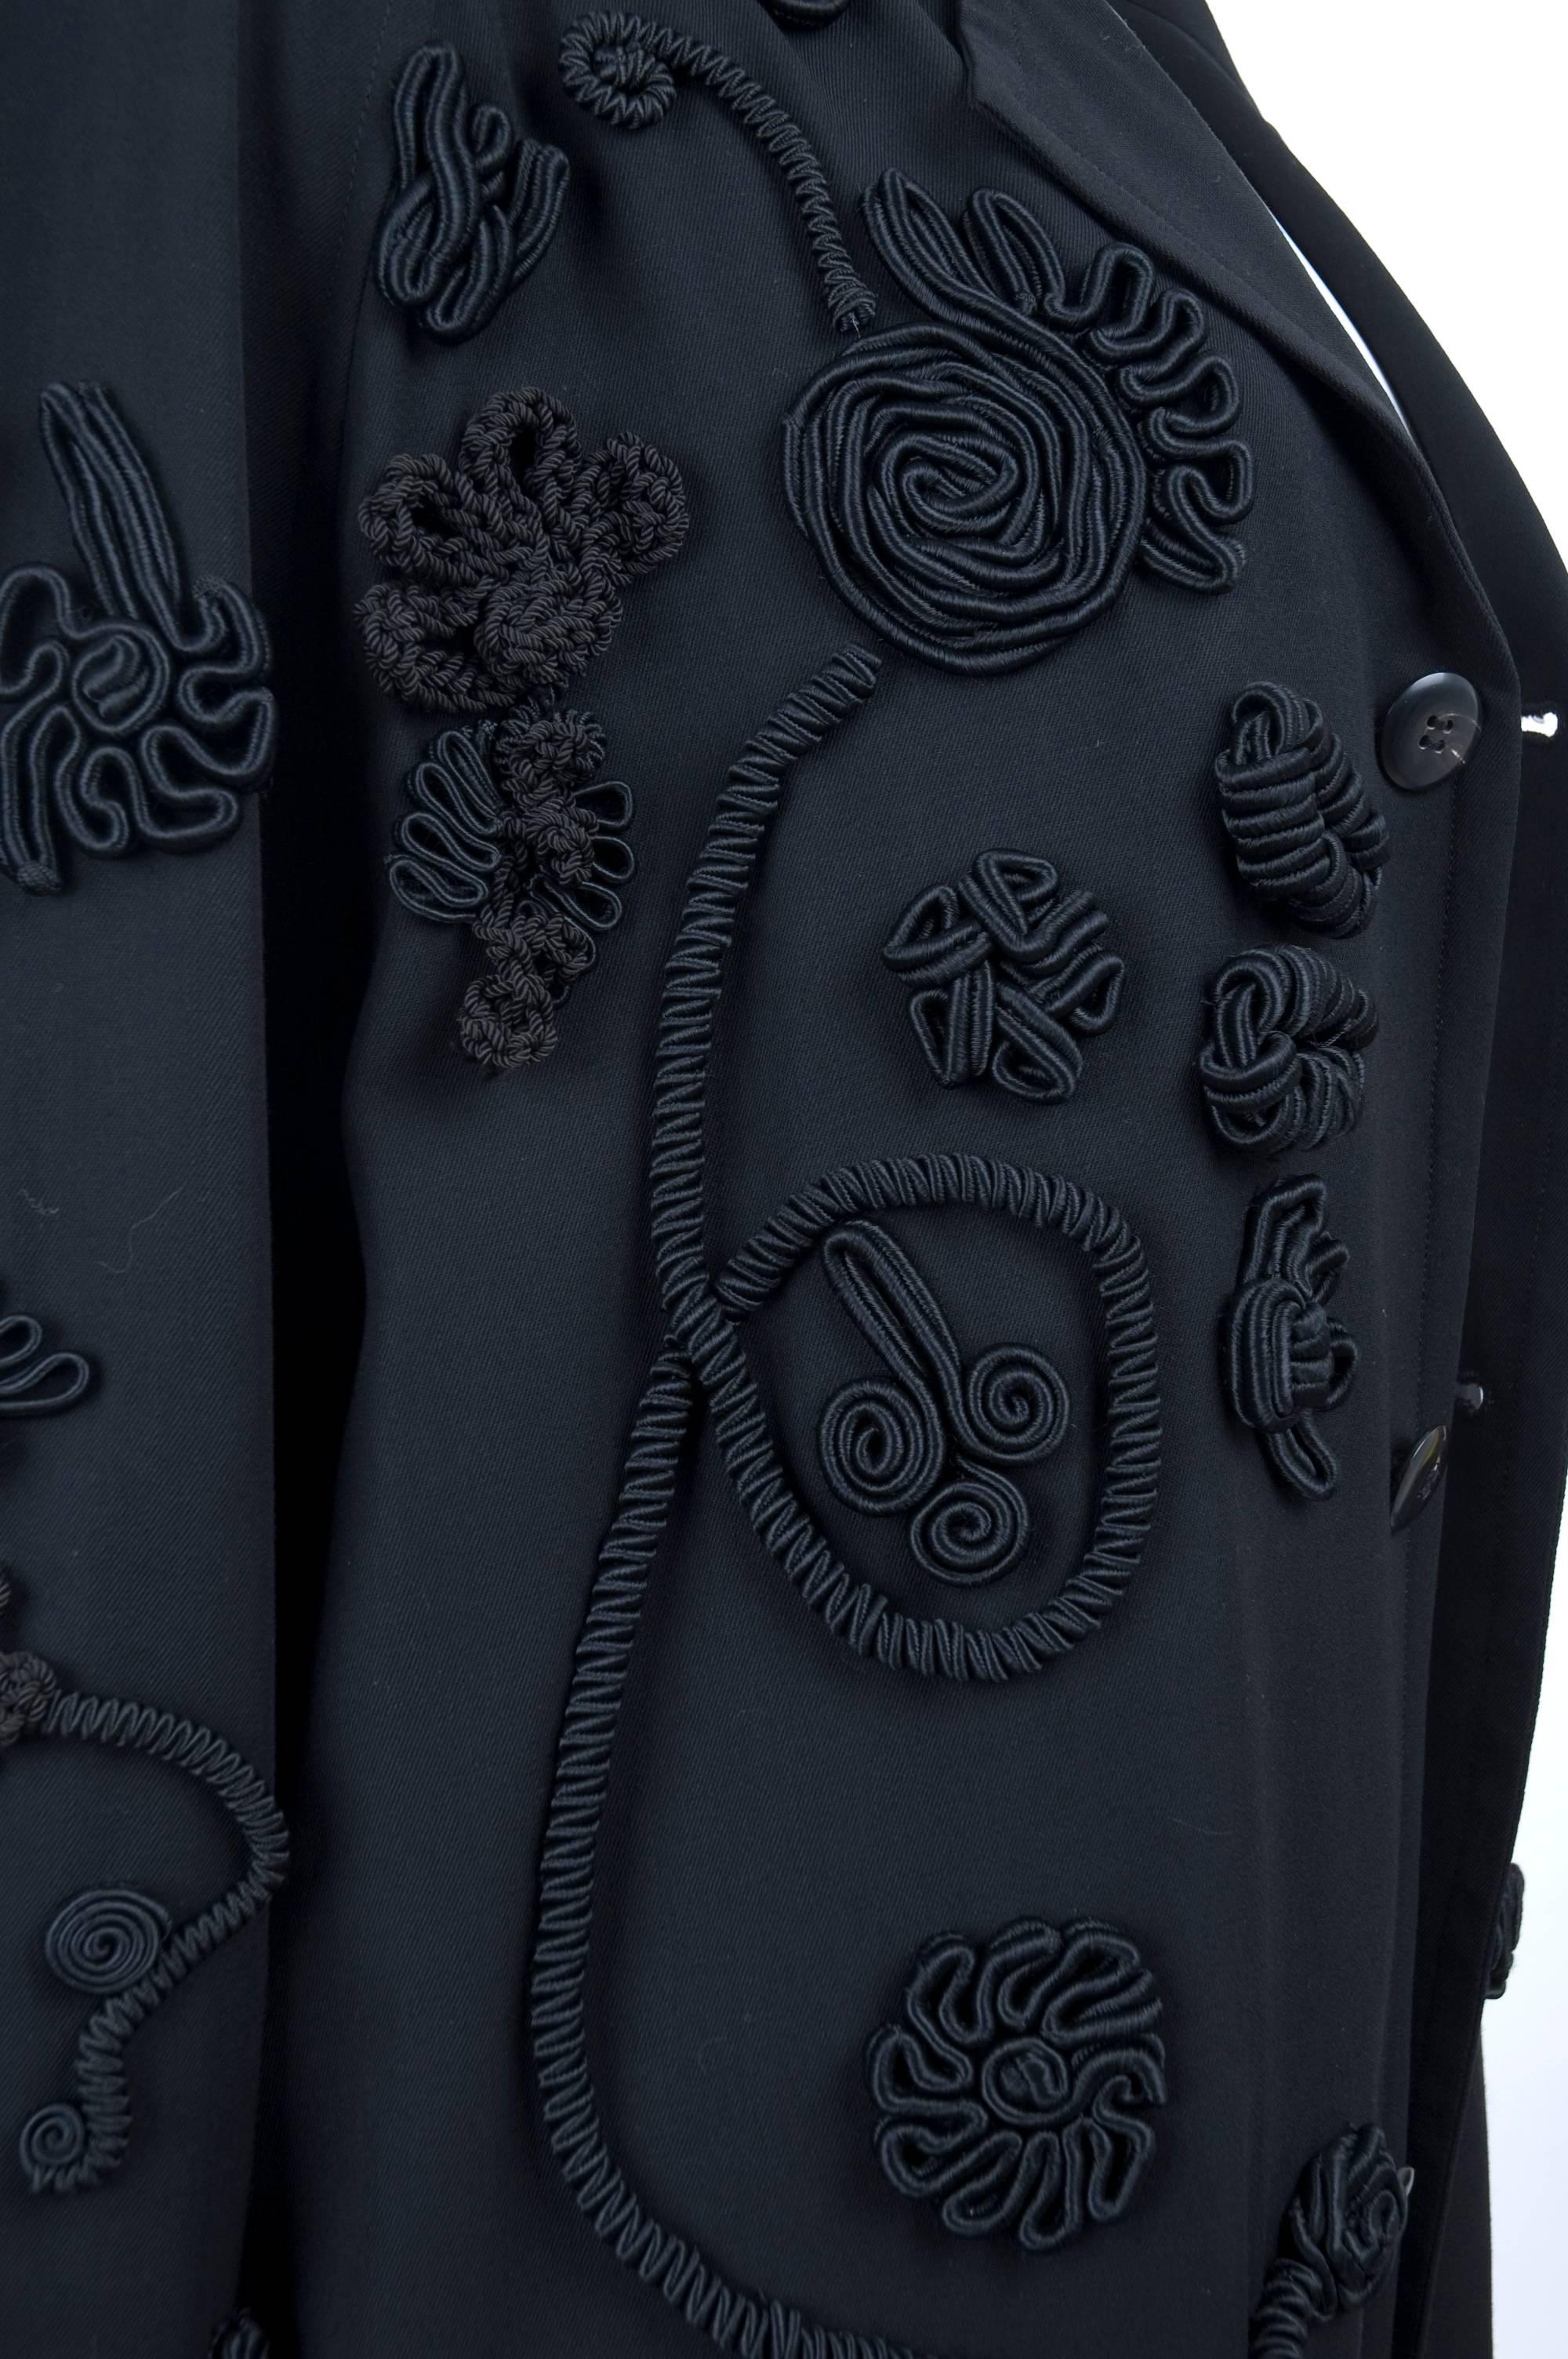 90's Yohji Yamamoto Black Coat with Corded Embroidery + Tassels Allover. For Sale 1